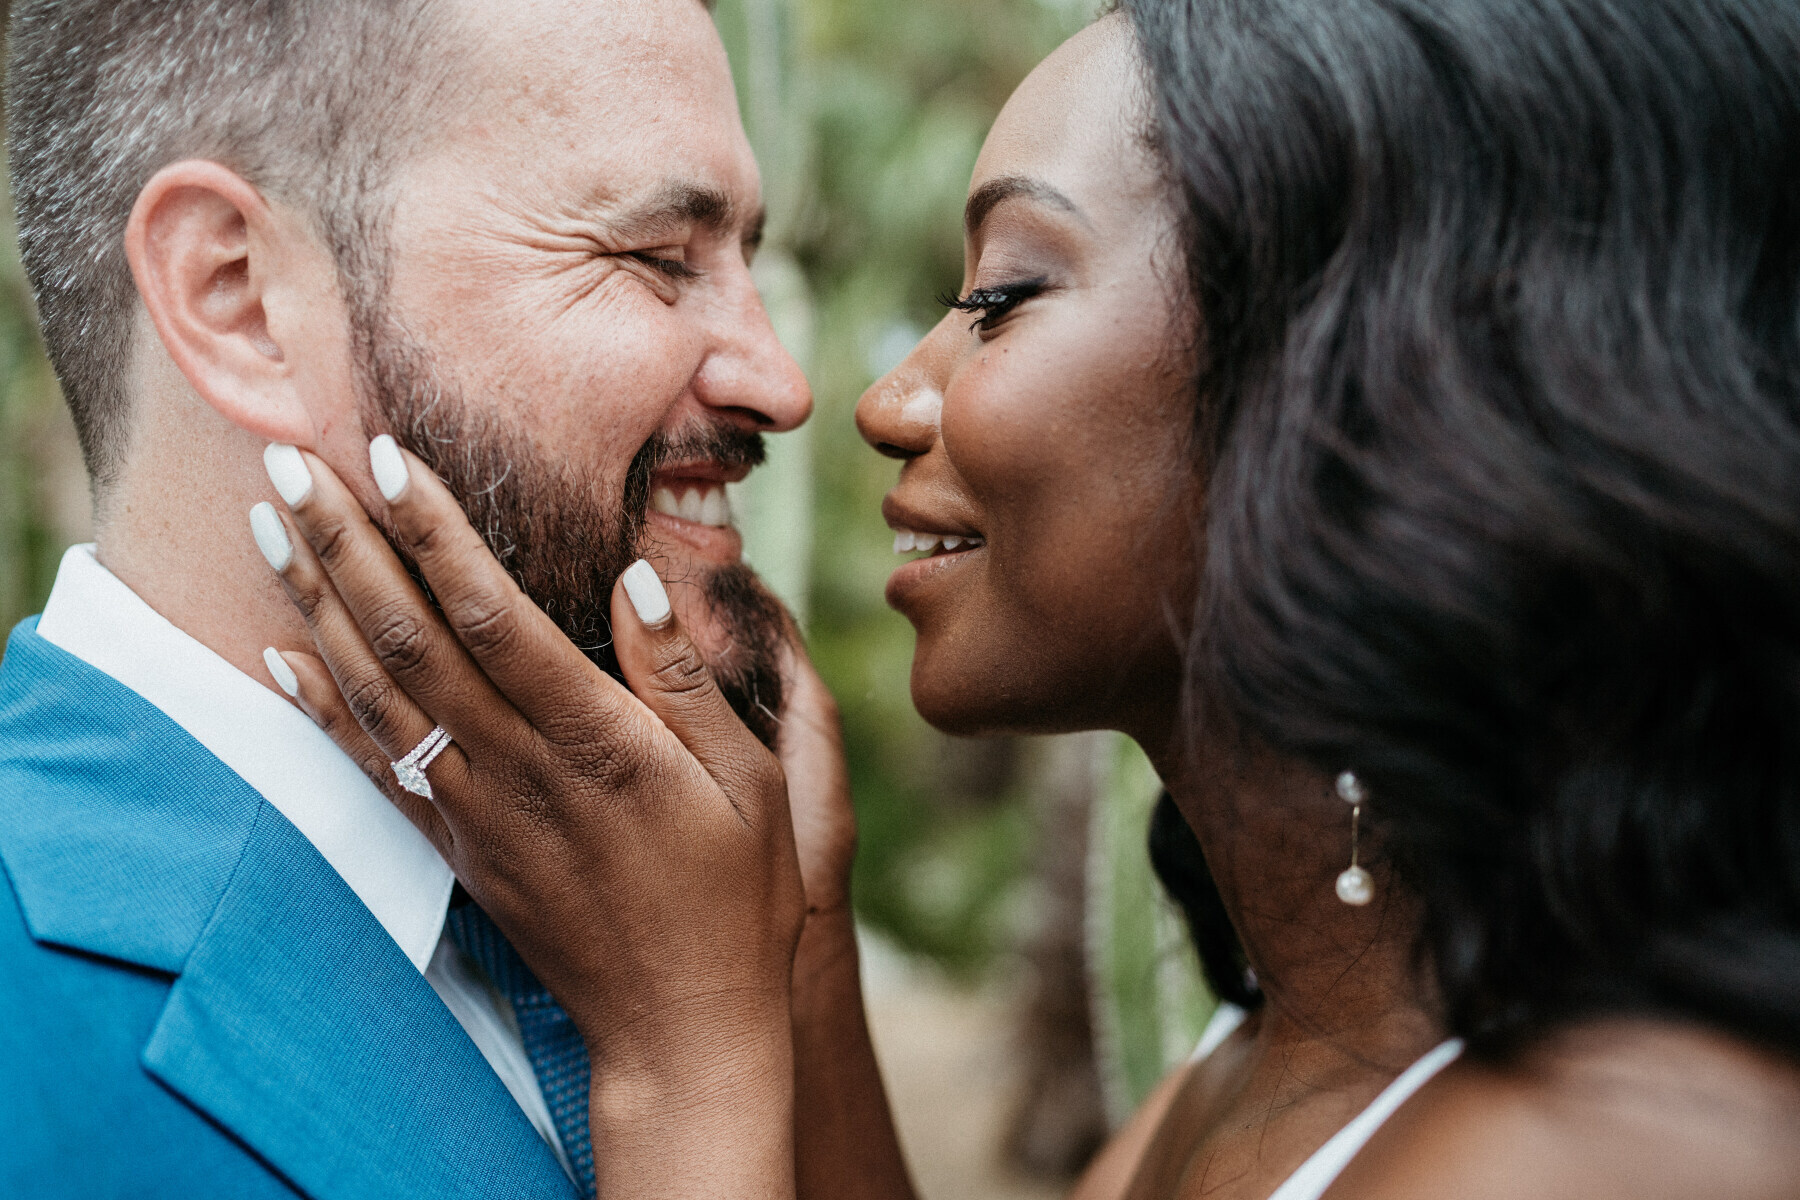 Wedding Ring Design: A bride holding a groom's face in her hands as they lean in to one another. Her marquise diamond ring can be seen on her ring finger.